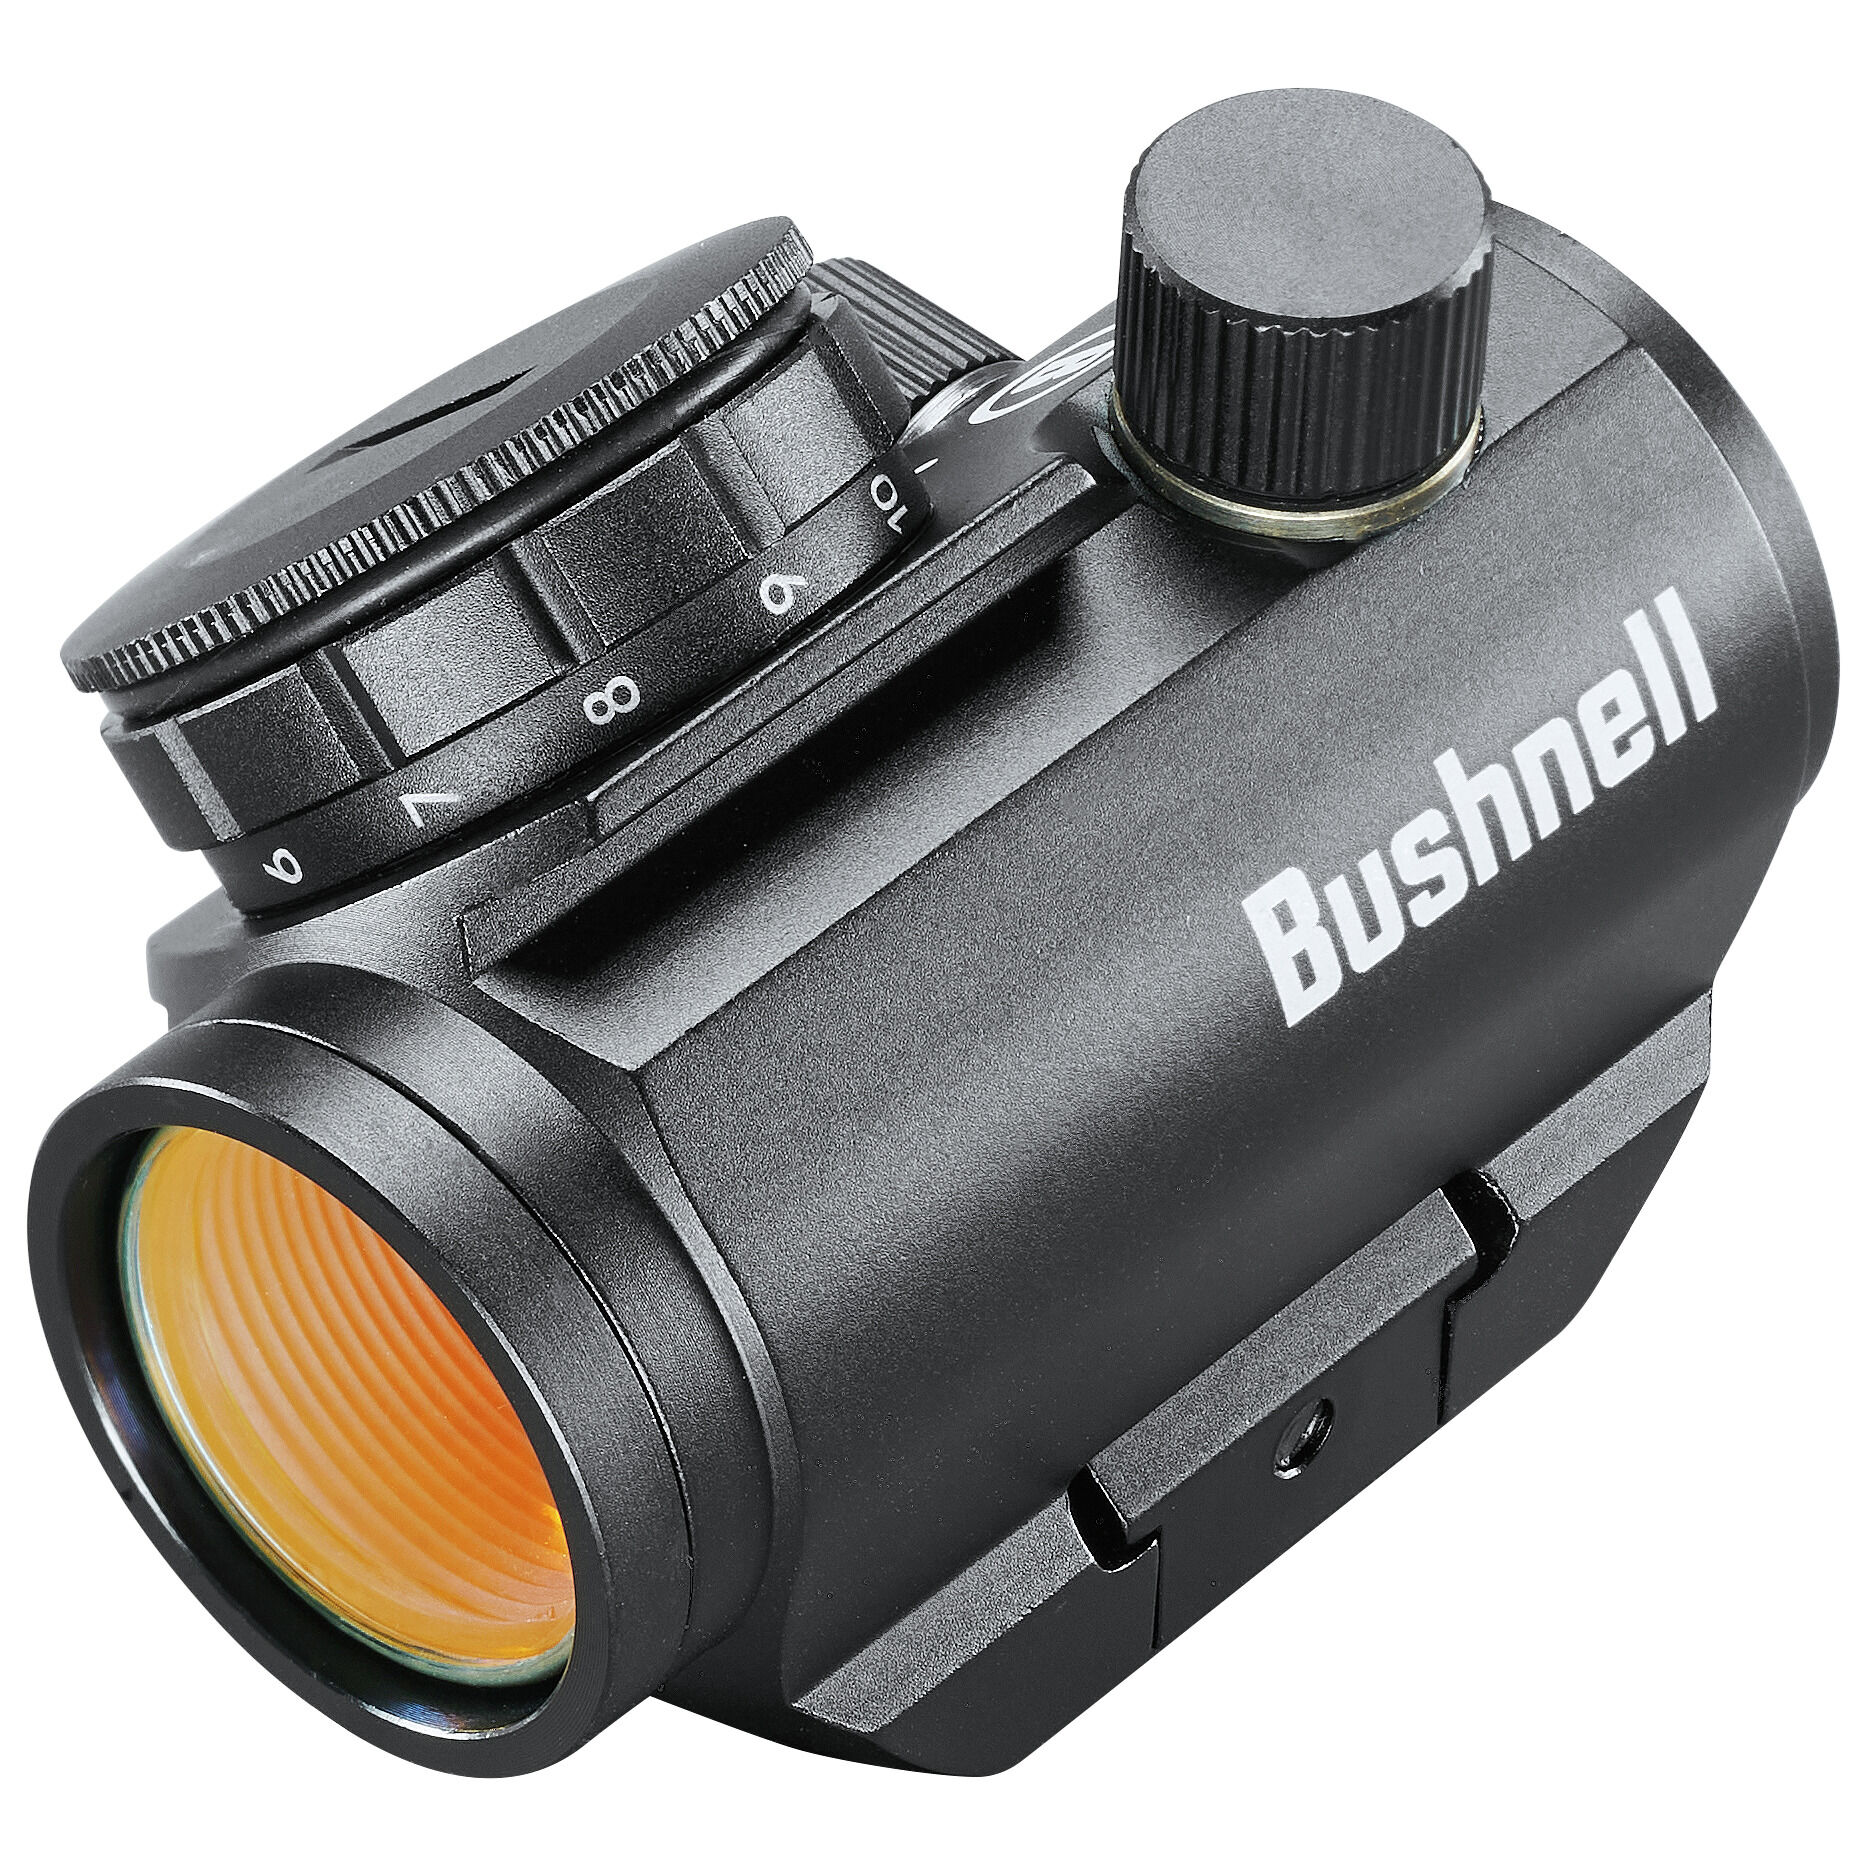 Original NEW IN BOX Gold Bushnell Trophy TRS-25 Red Dot Sight Rifle Scope 20mm